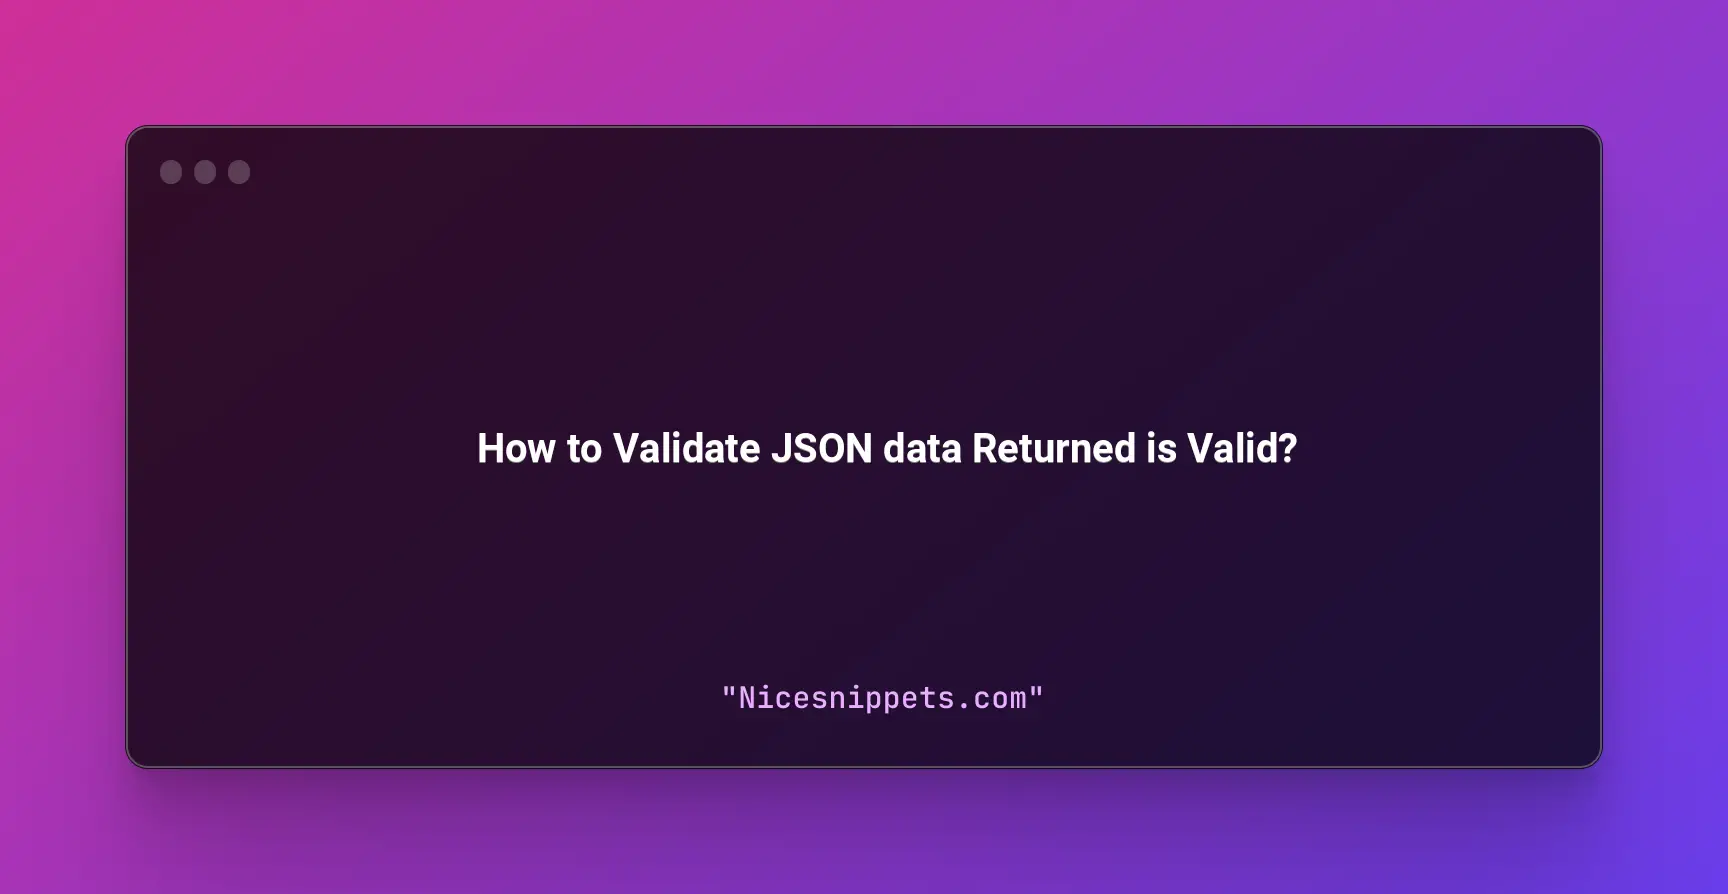 How to Validate JSON data Returned is Valid?